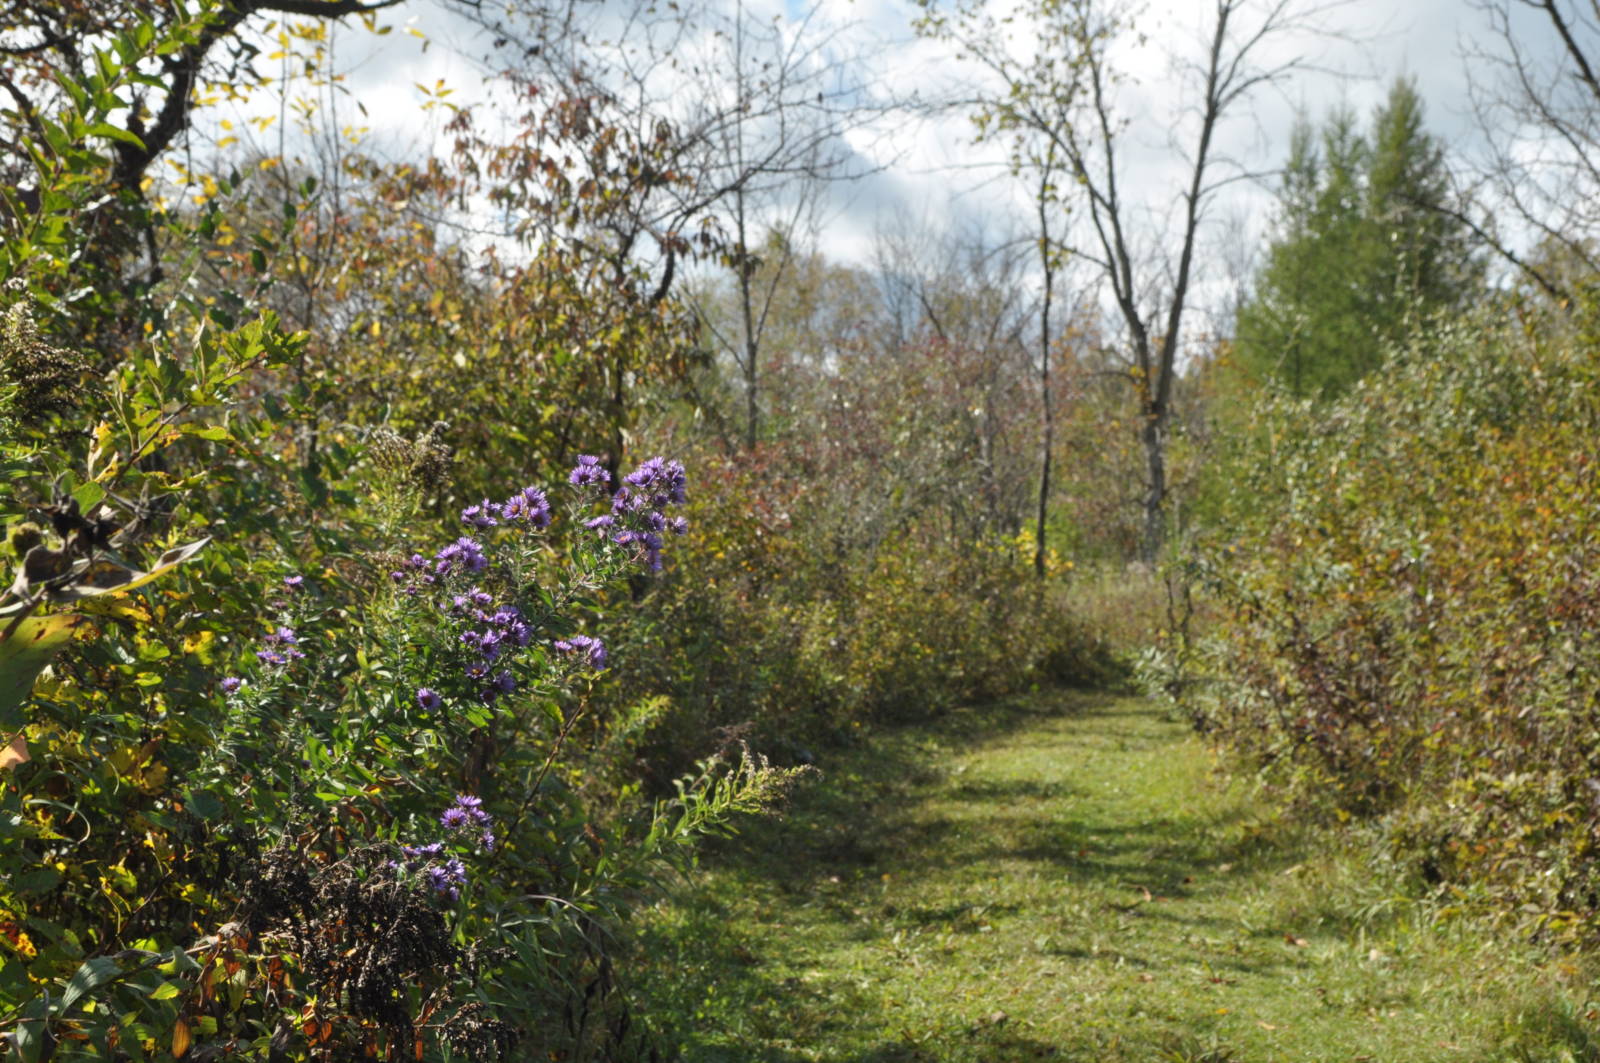 natural trail through a prairie in bloom with trees in the background